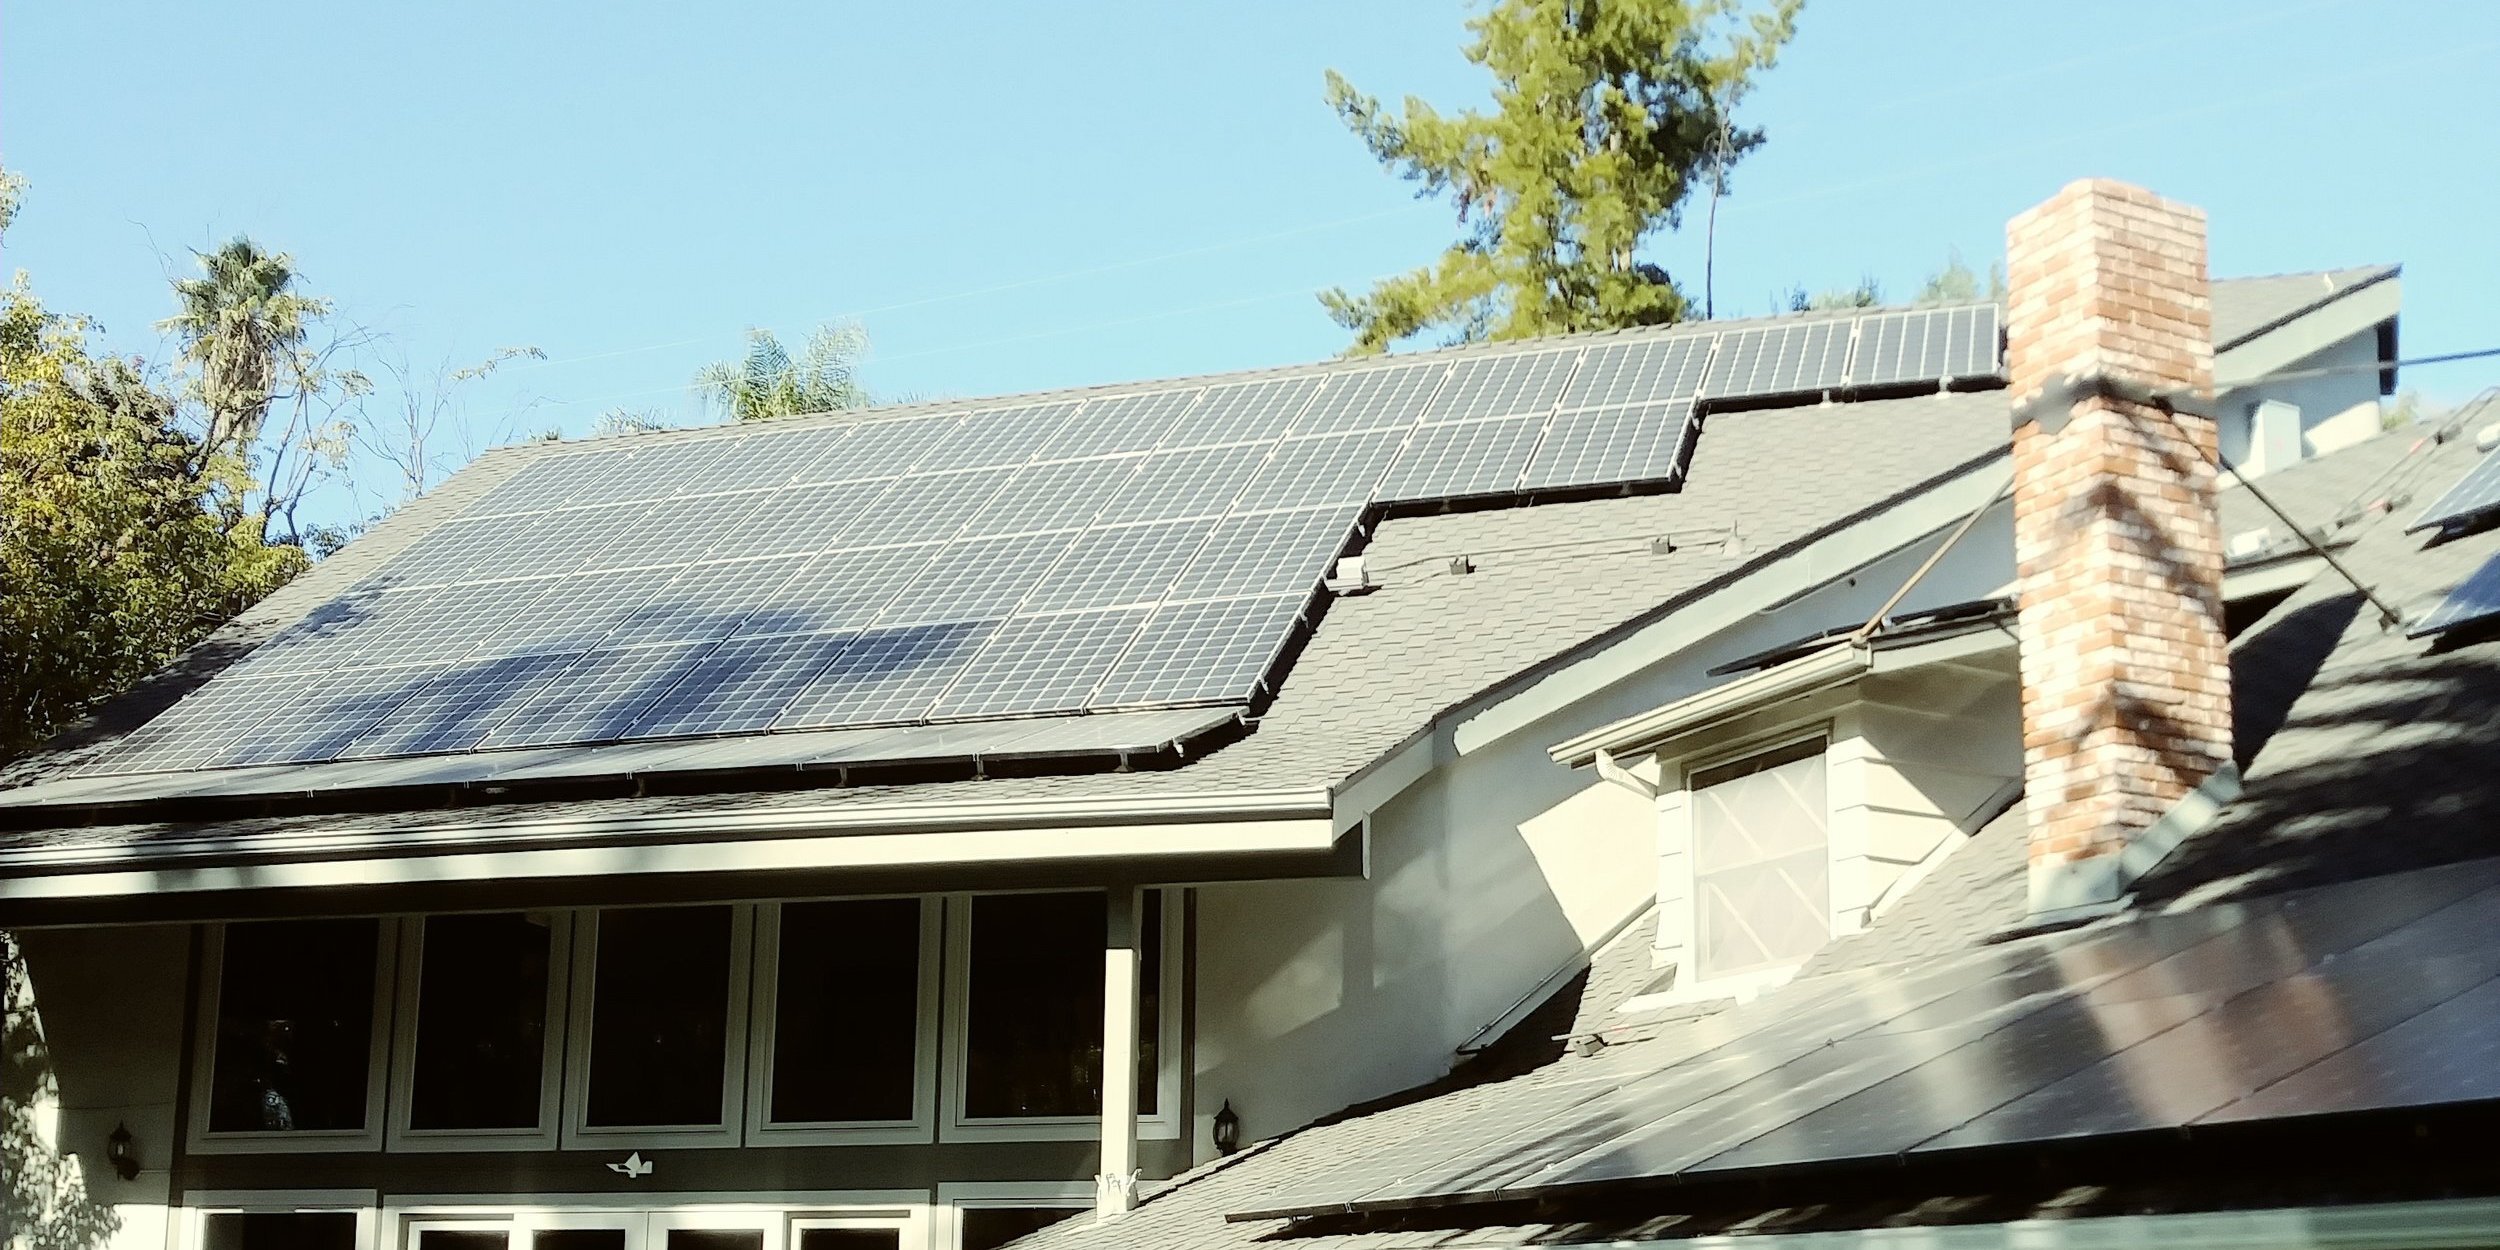 How Many Residential Solar Panels Are Needed To Run a House?